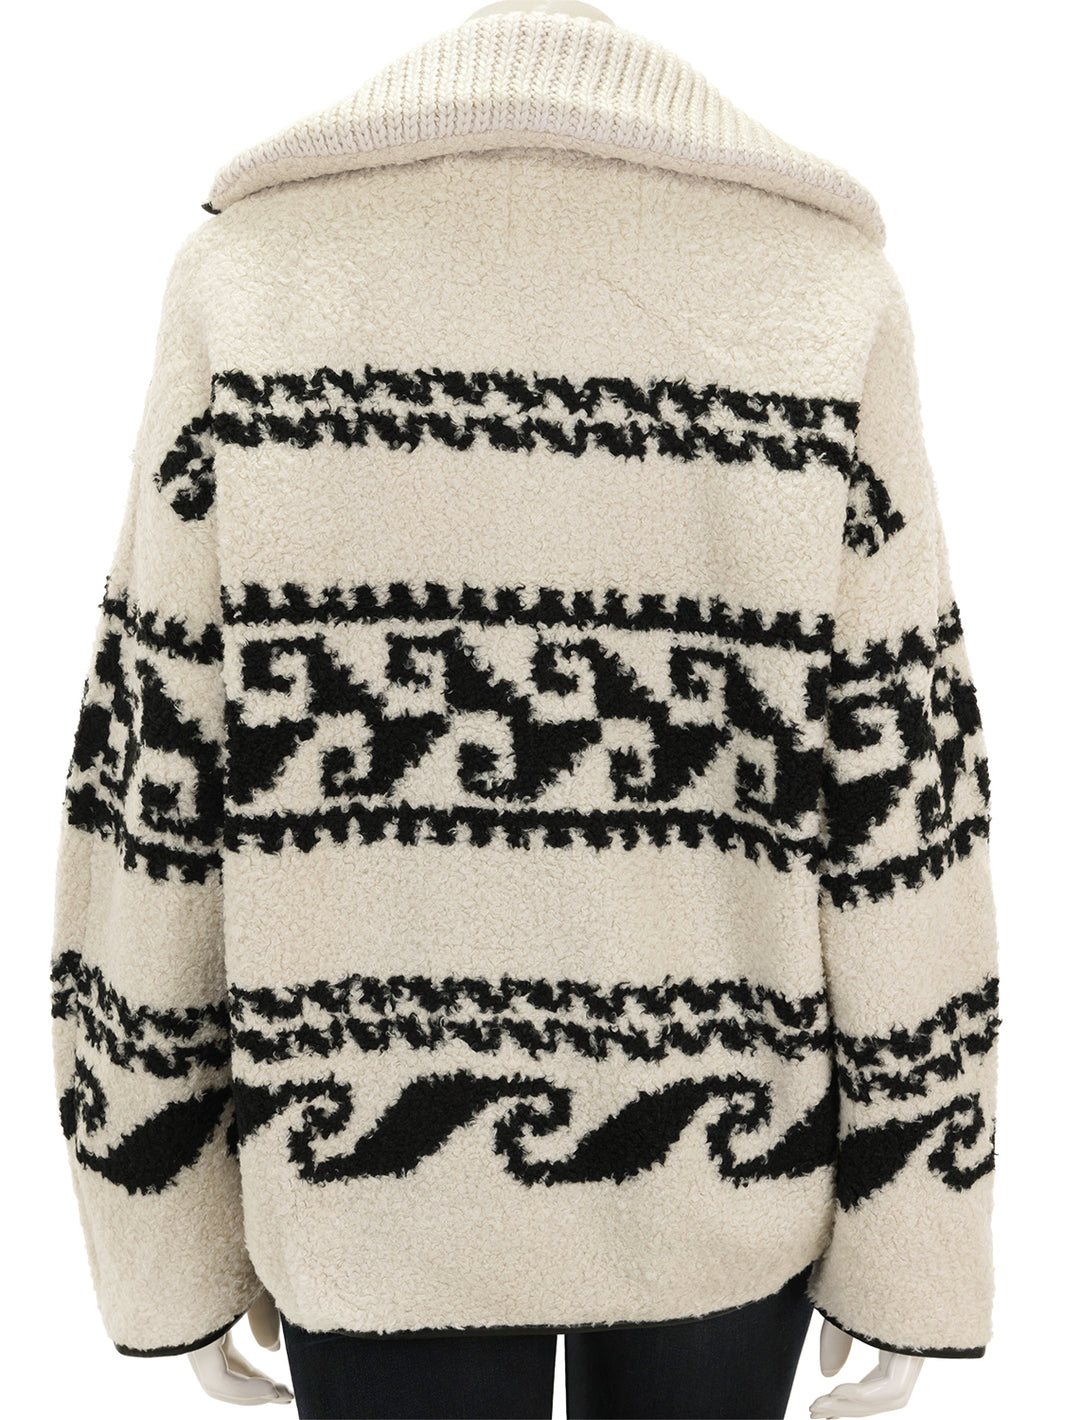 Back view of Isabel Marant's marner pullover in ecru.